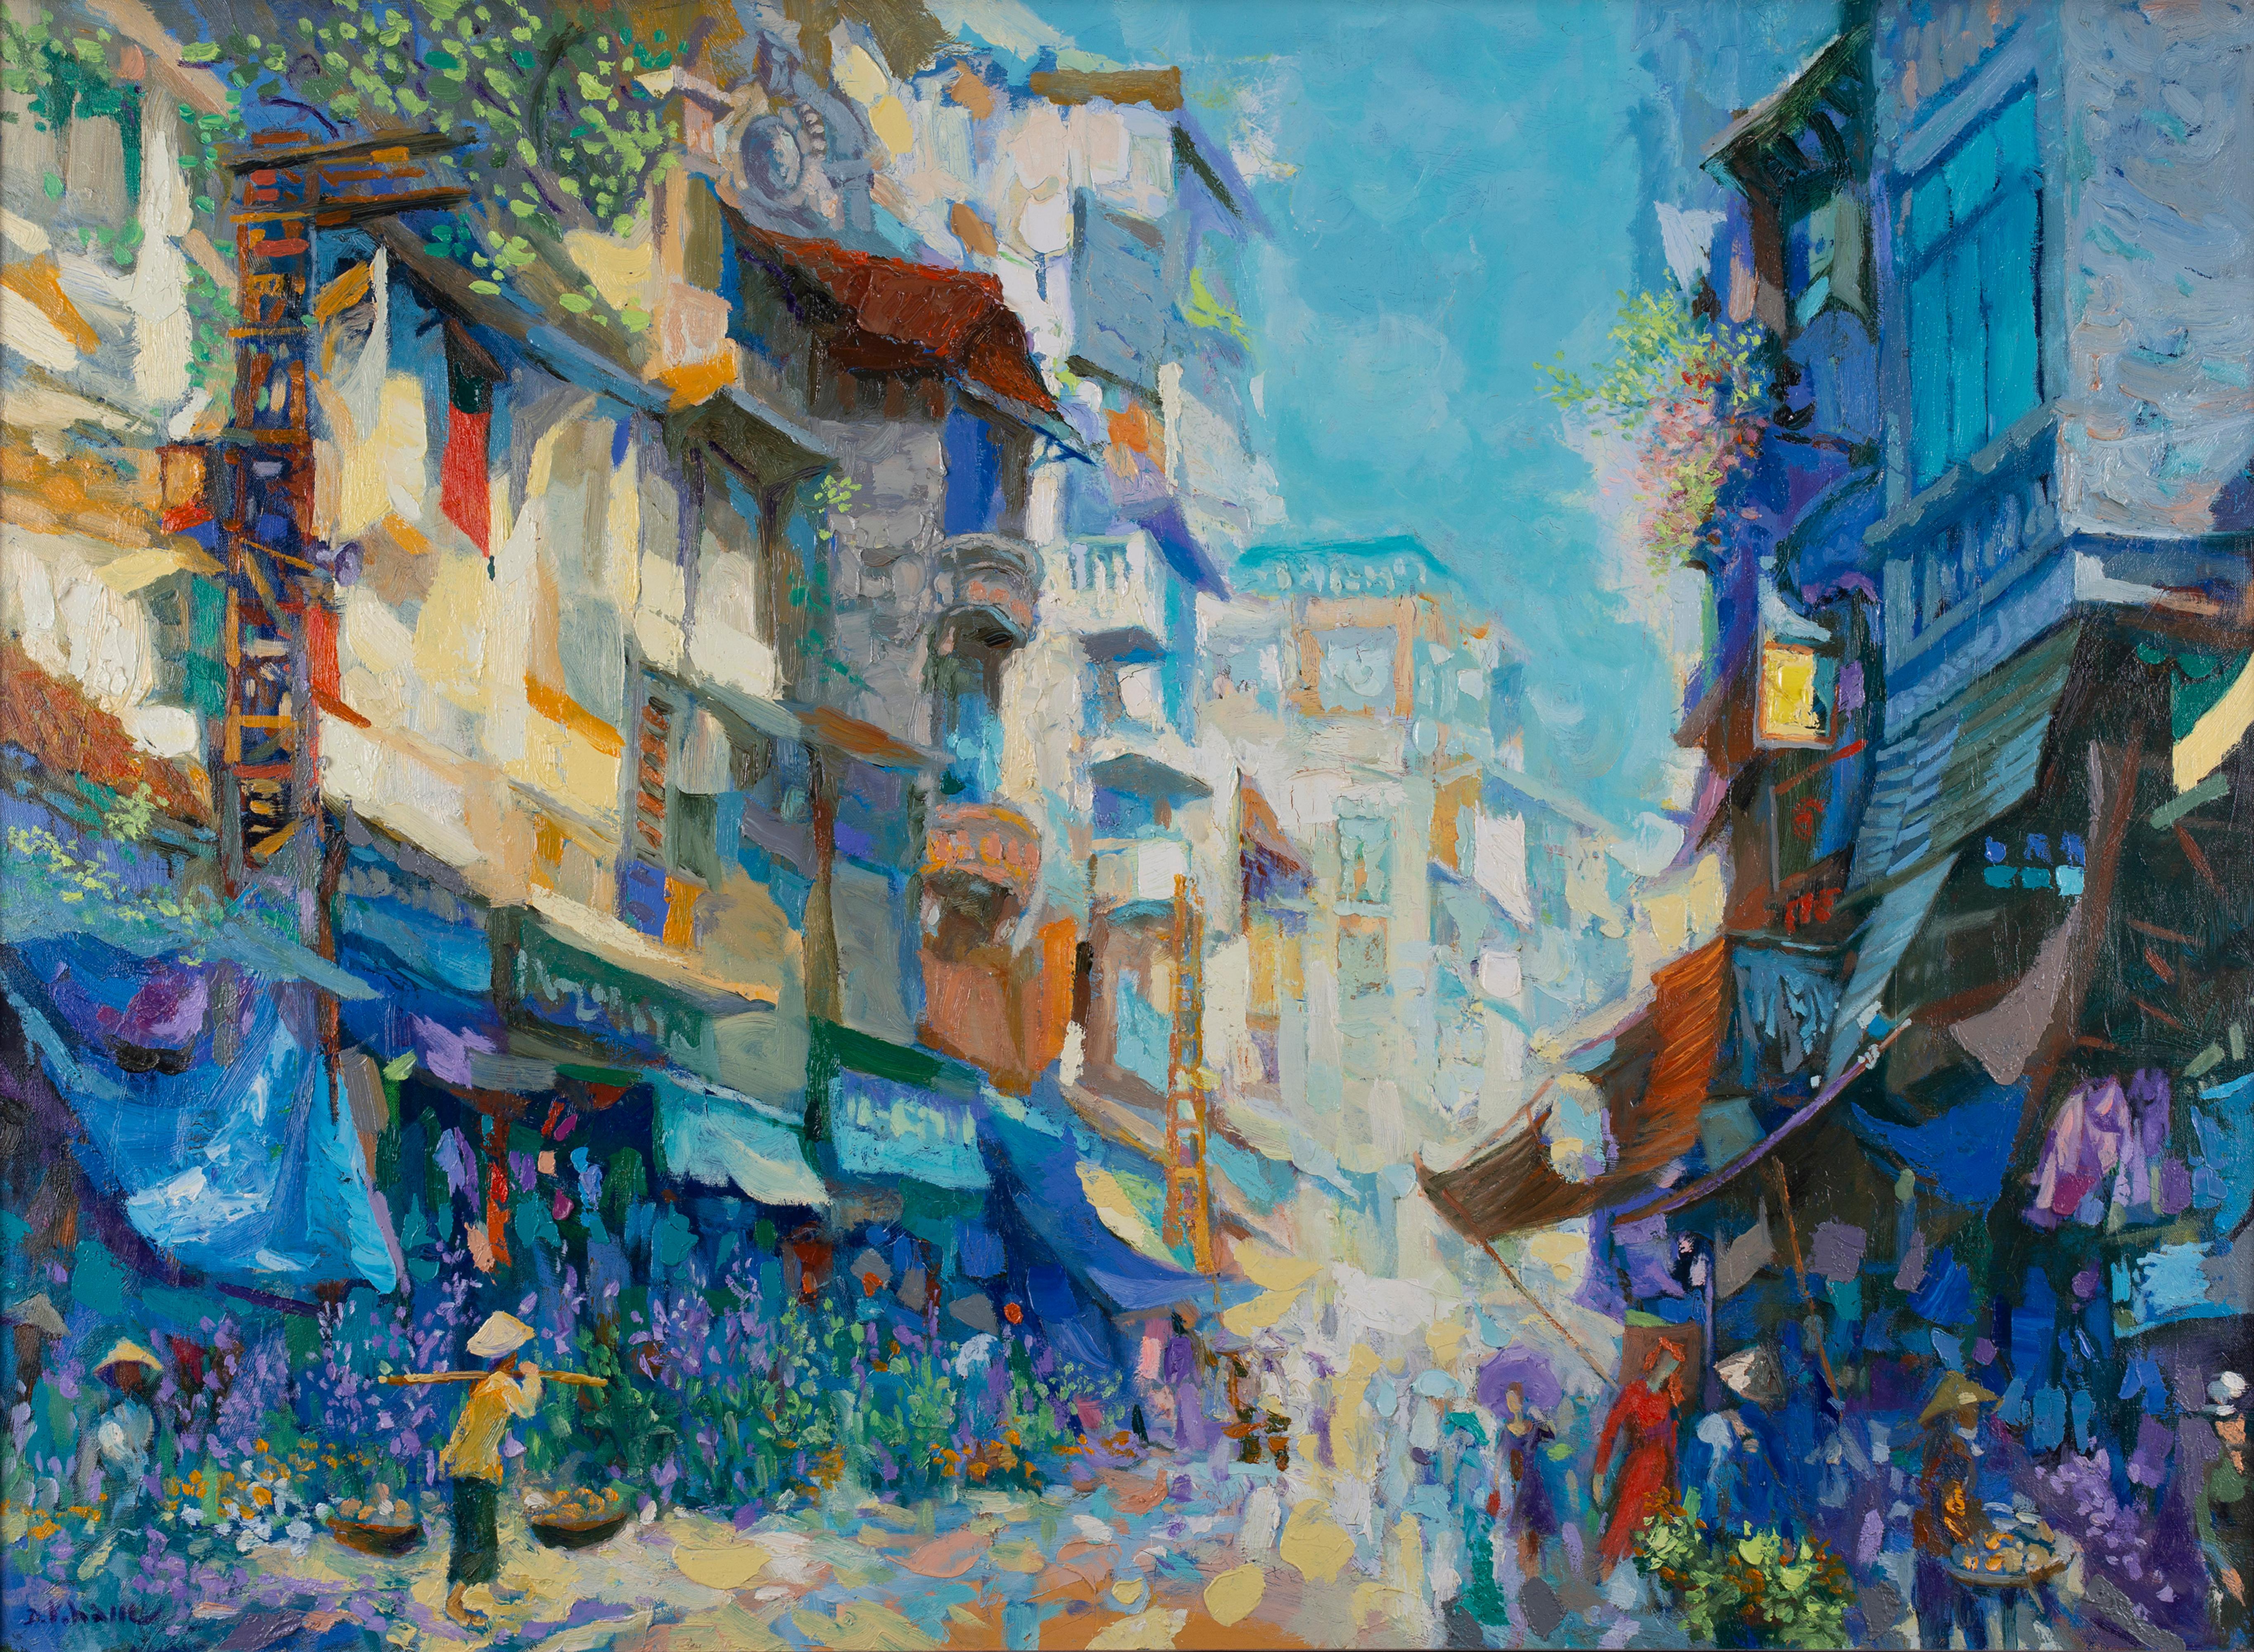 'Hang Bong Street' Impressionist Painting of a Street Scene